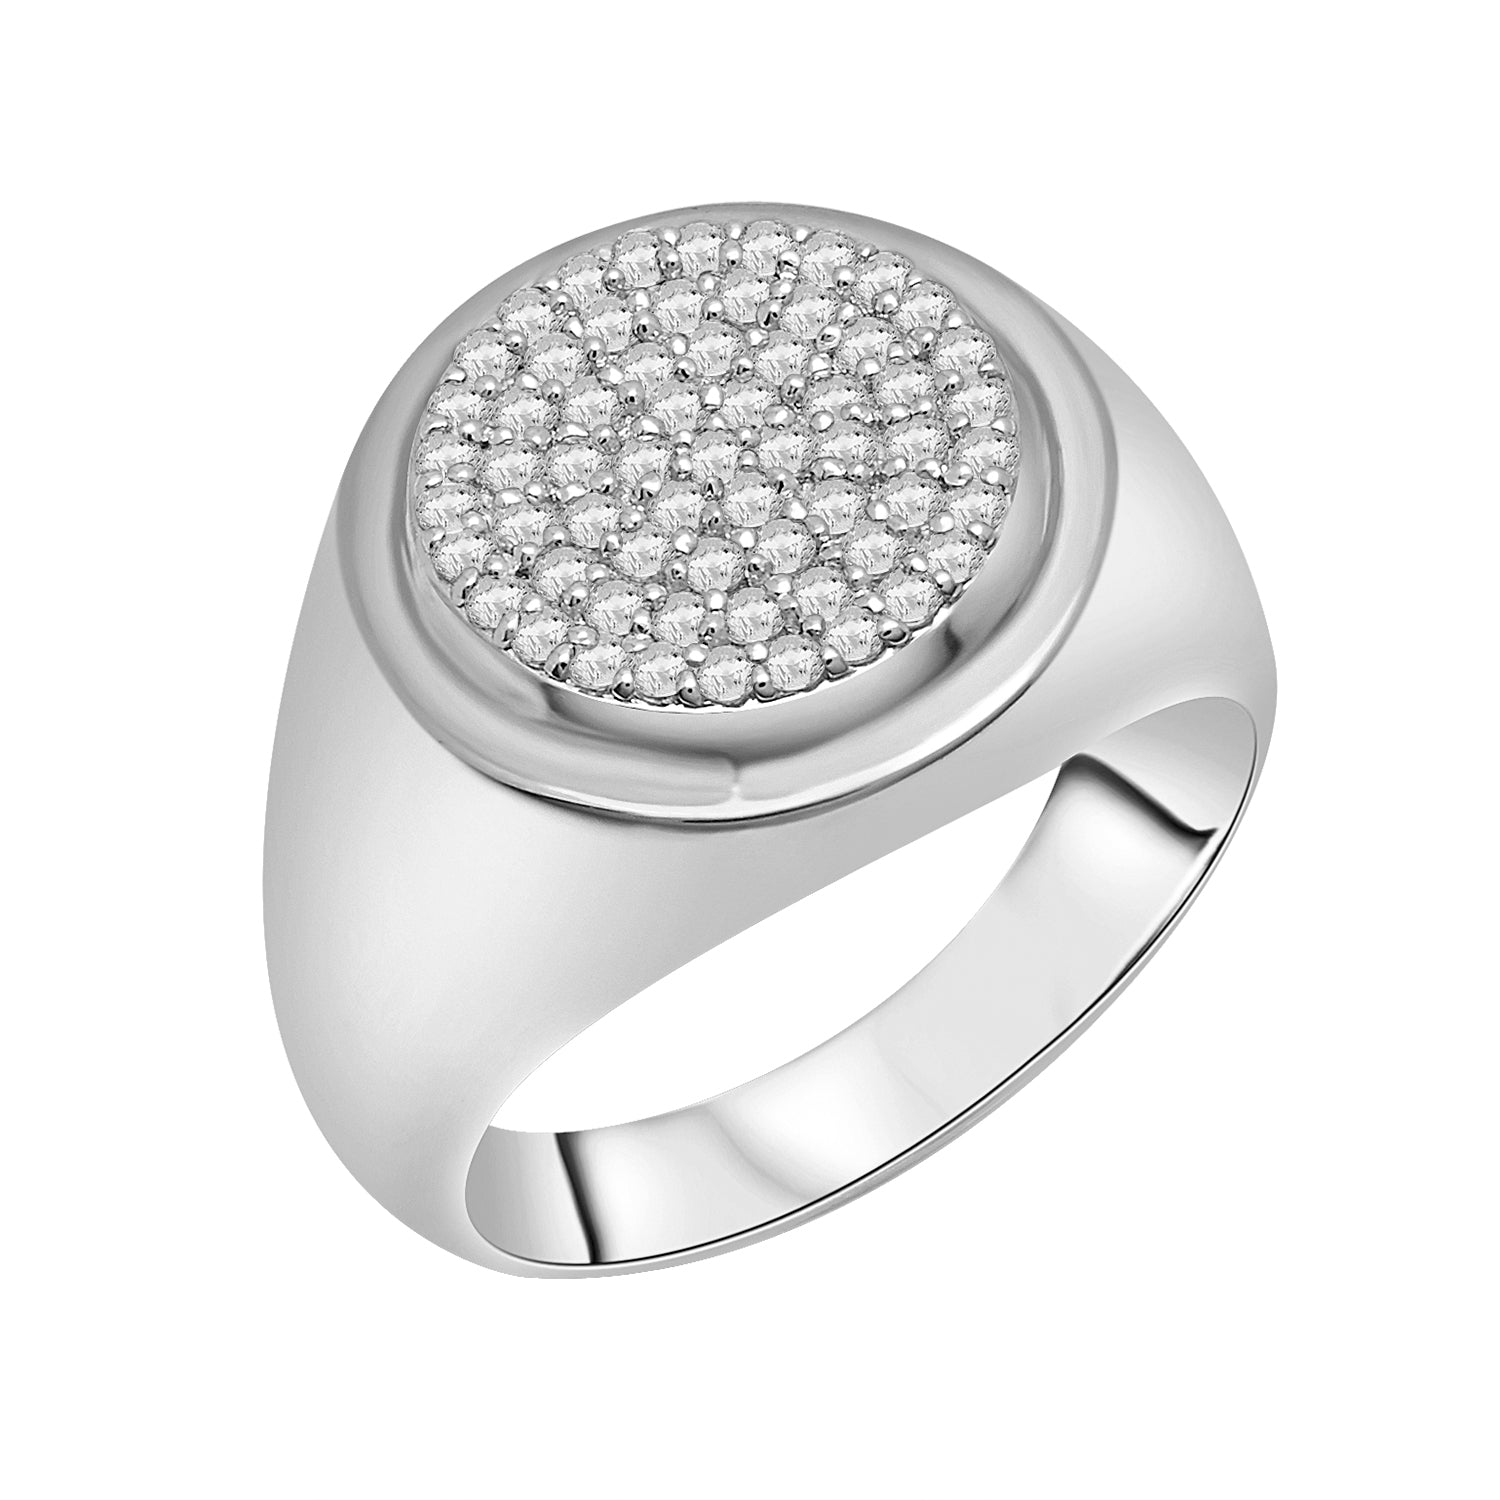 Circle Signet Diamond Ring Placed in Silver